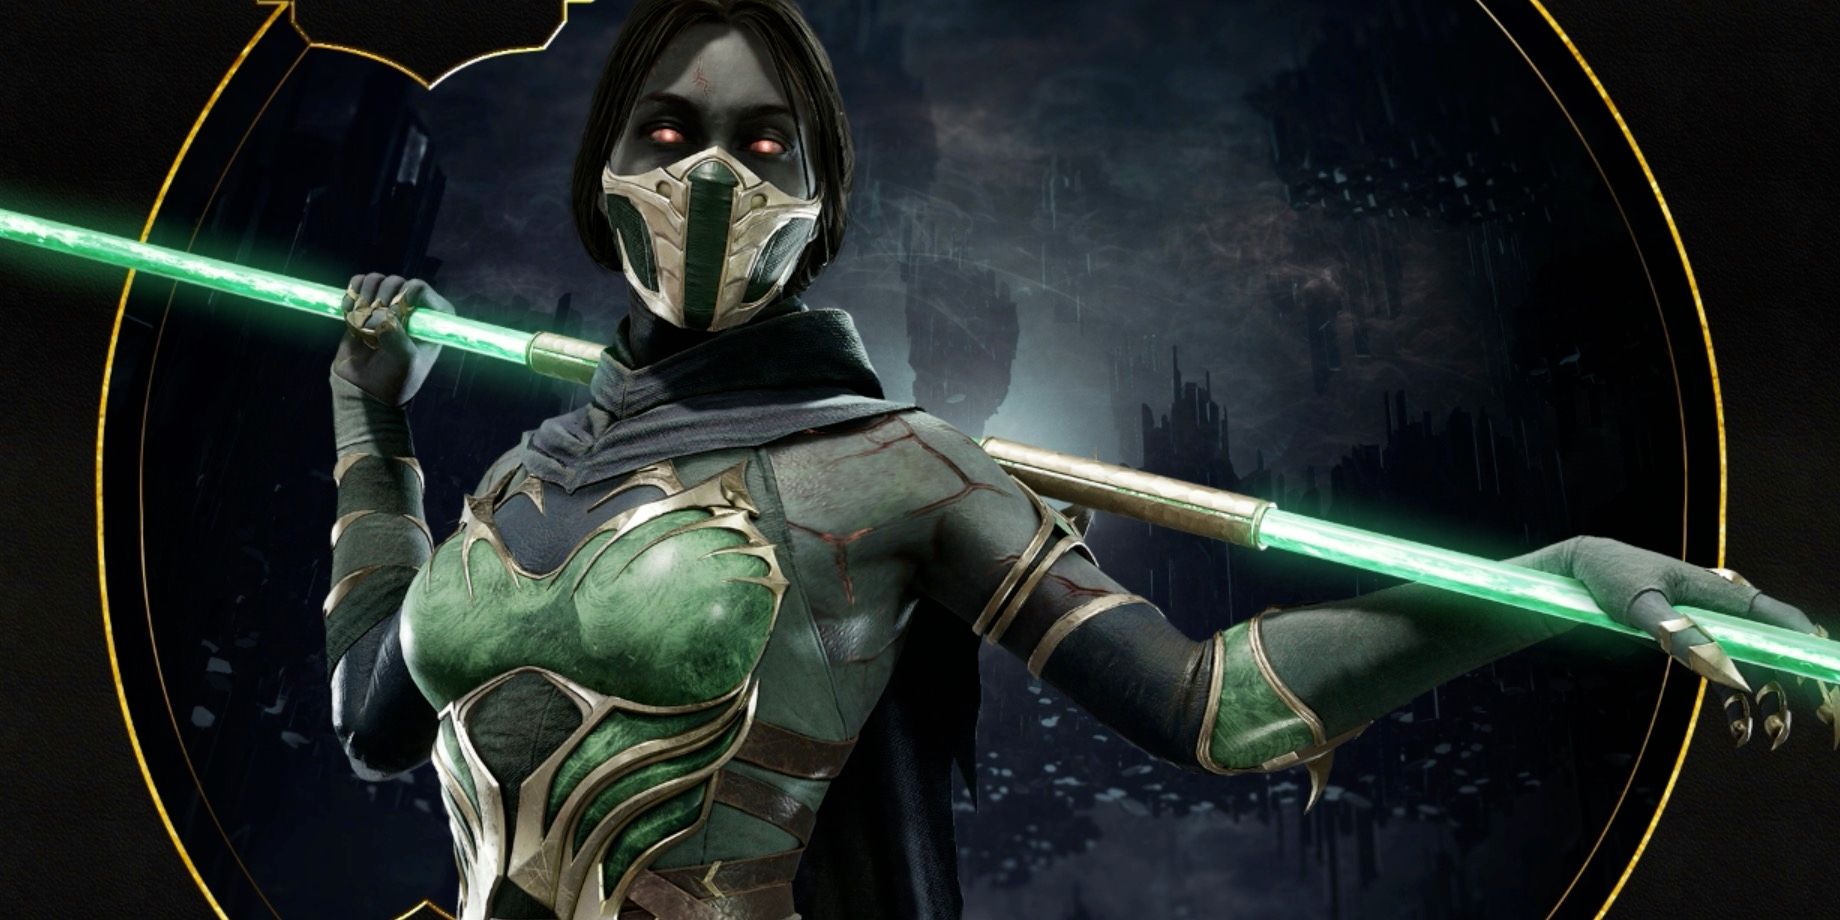 Jade holds a weapon in Mortal Kombat 11